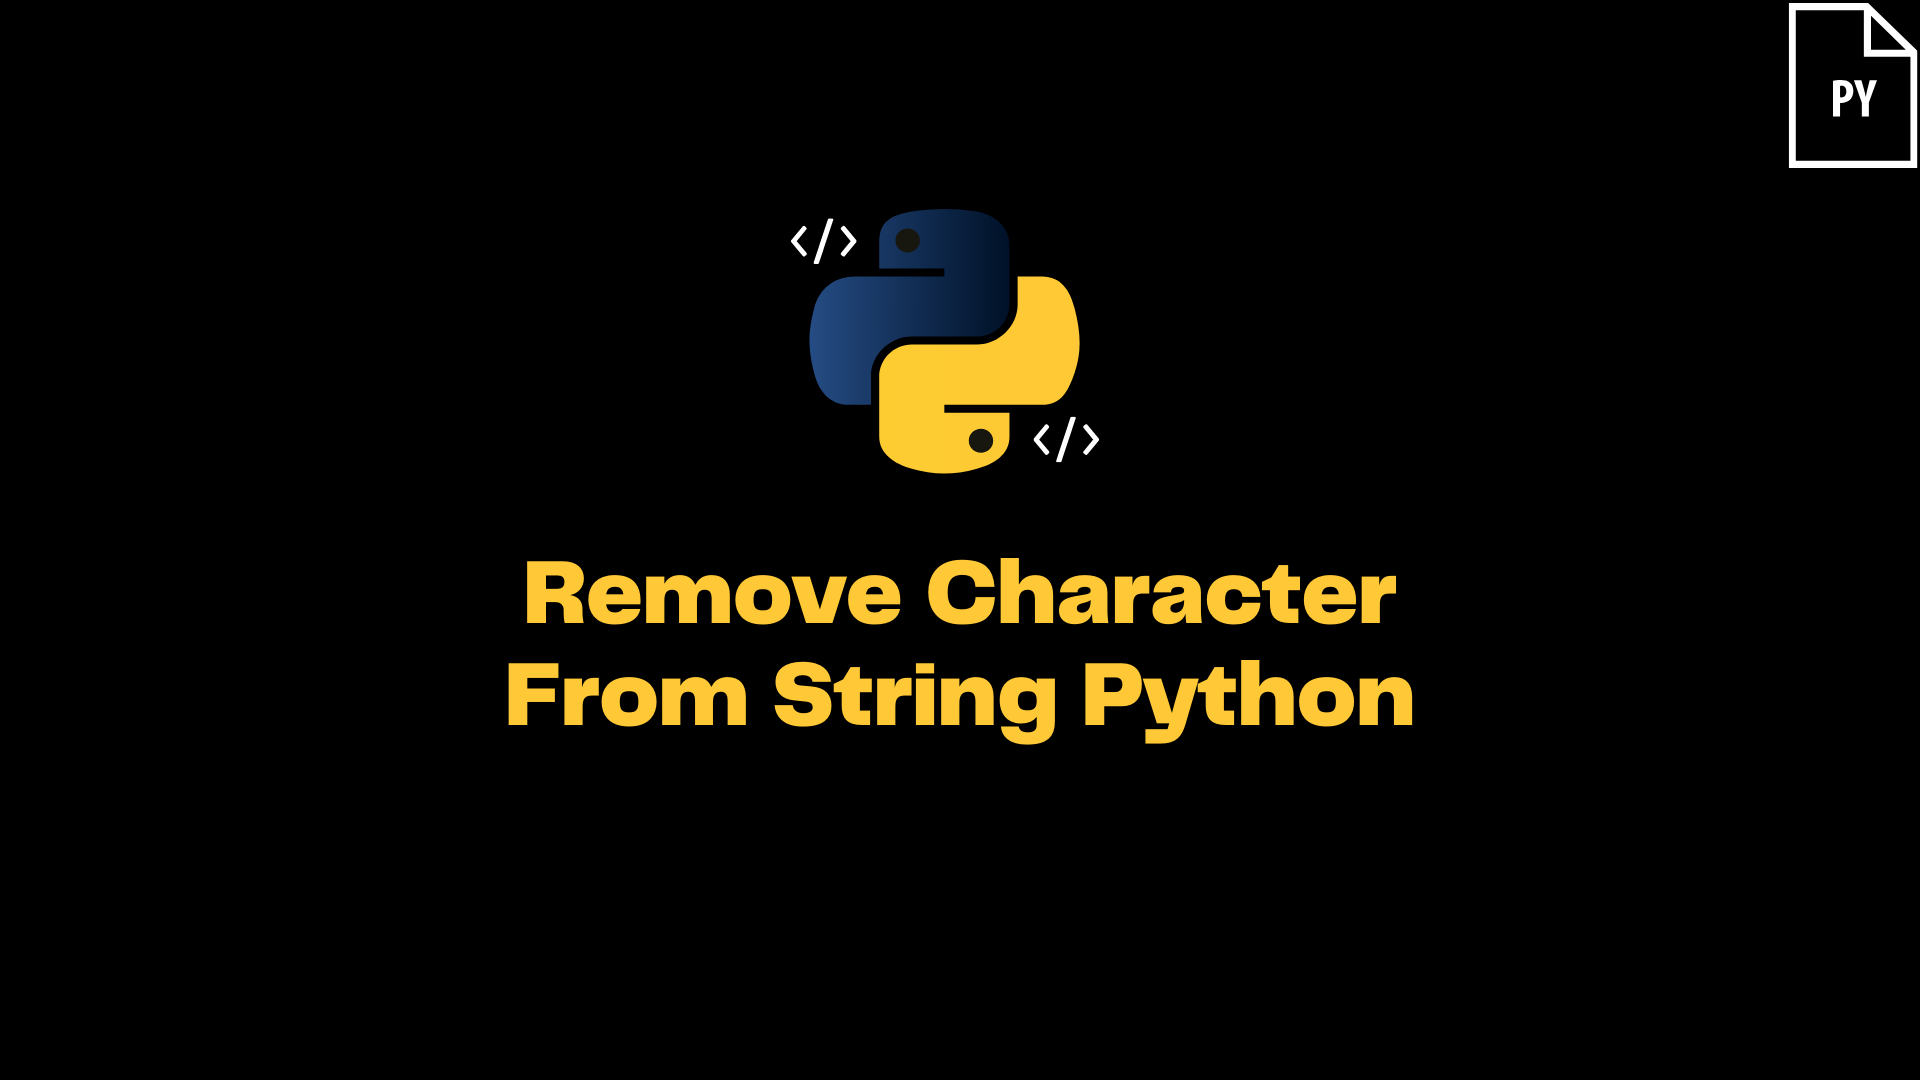 ItsMyCode: Remove Character From String Python